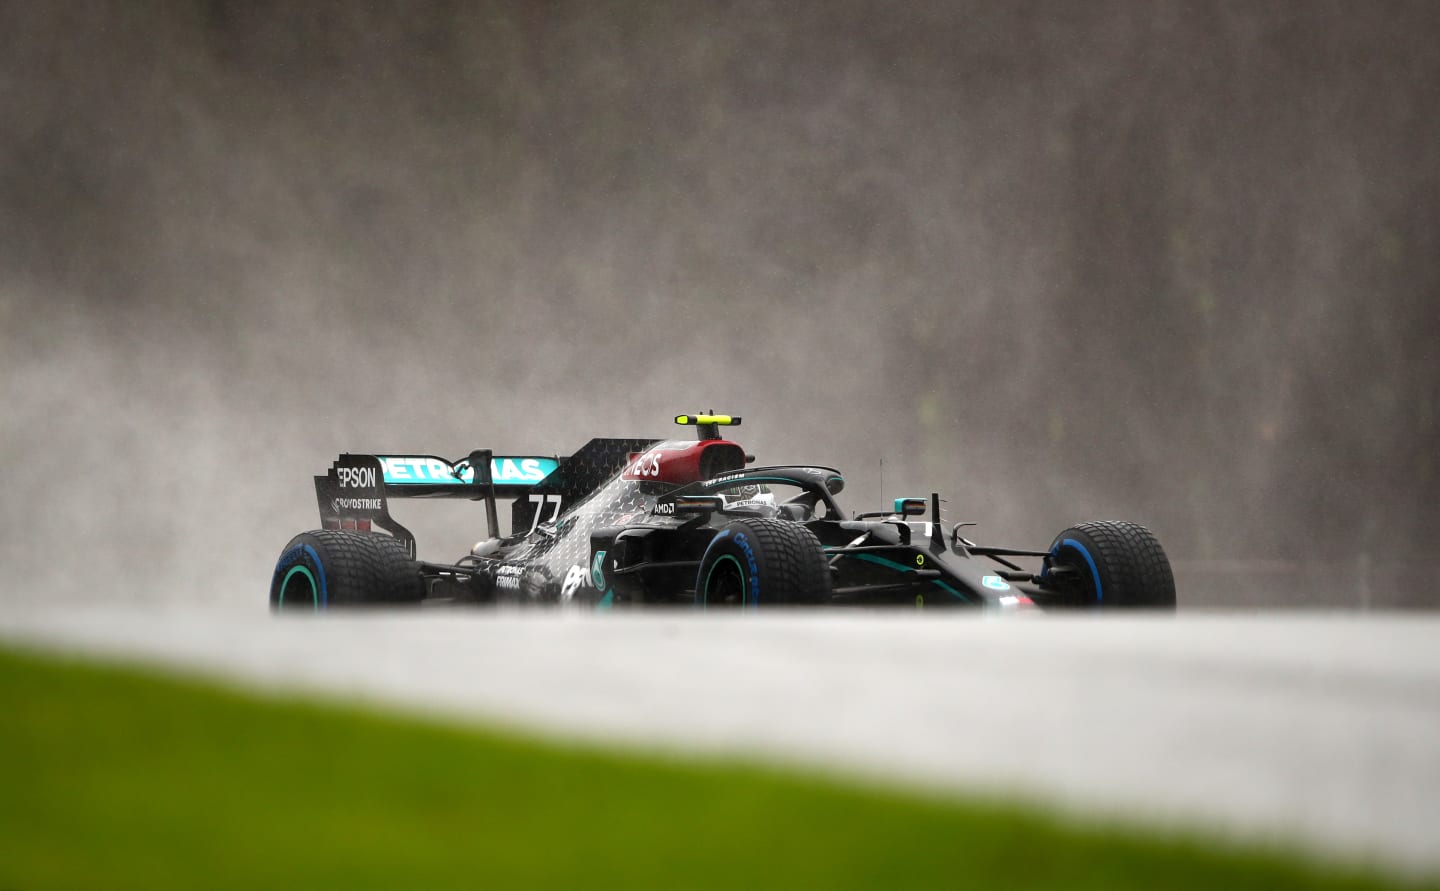 SPIELBERG, AUSTRIA - JULY 11: Valtteri Bottas of Finland driving the (77) Mercedes AMG Petronas F1 Team Mercedes W11 on track during qualifying for the Formula One Grand Prix of Styria at Red Bull Ring on July 11, 2020 in Spielberg, Austria. (Photo by Bryn Lennon/Getty Images)